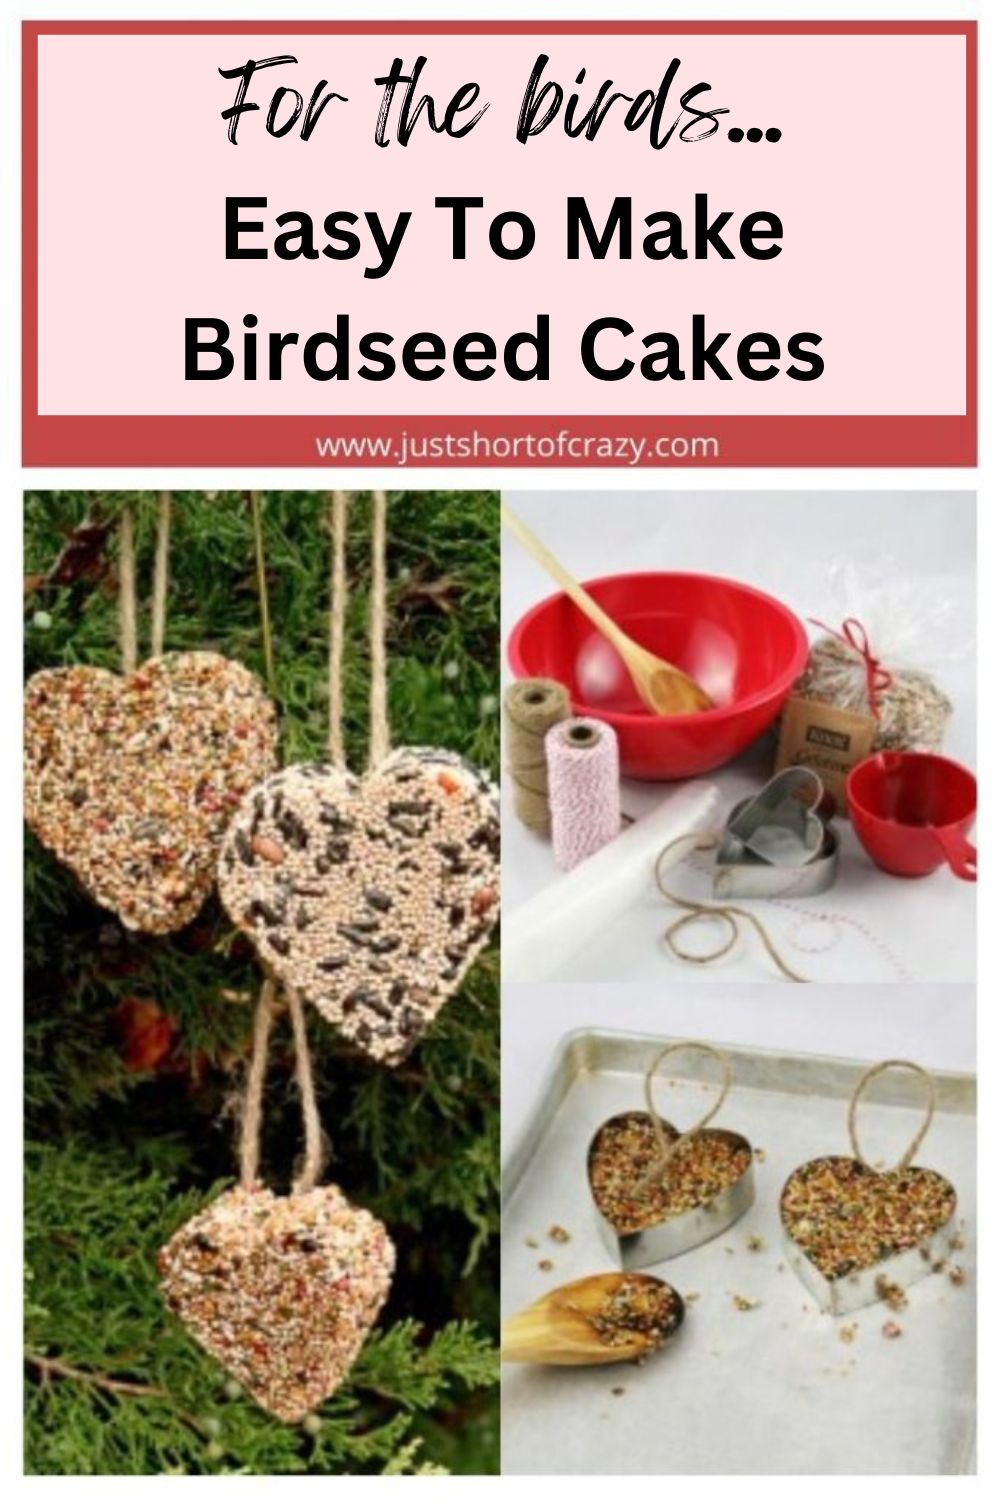 For the birds... Easy To Make Birdseed Cakes